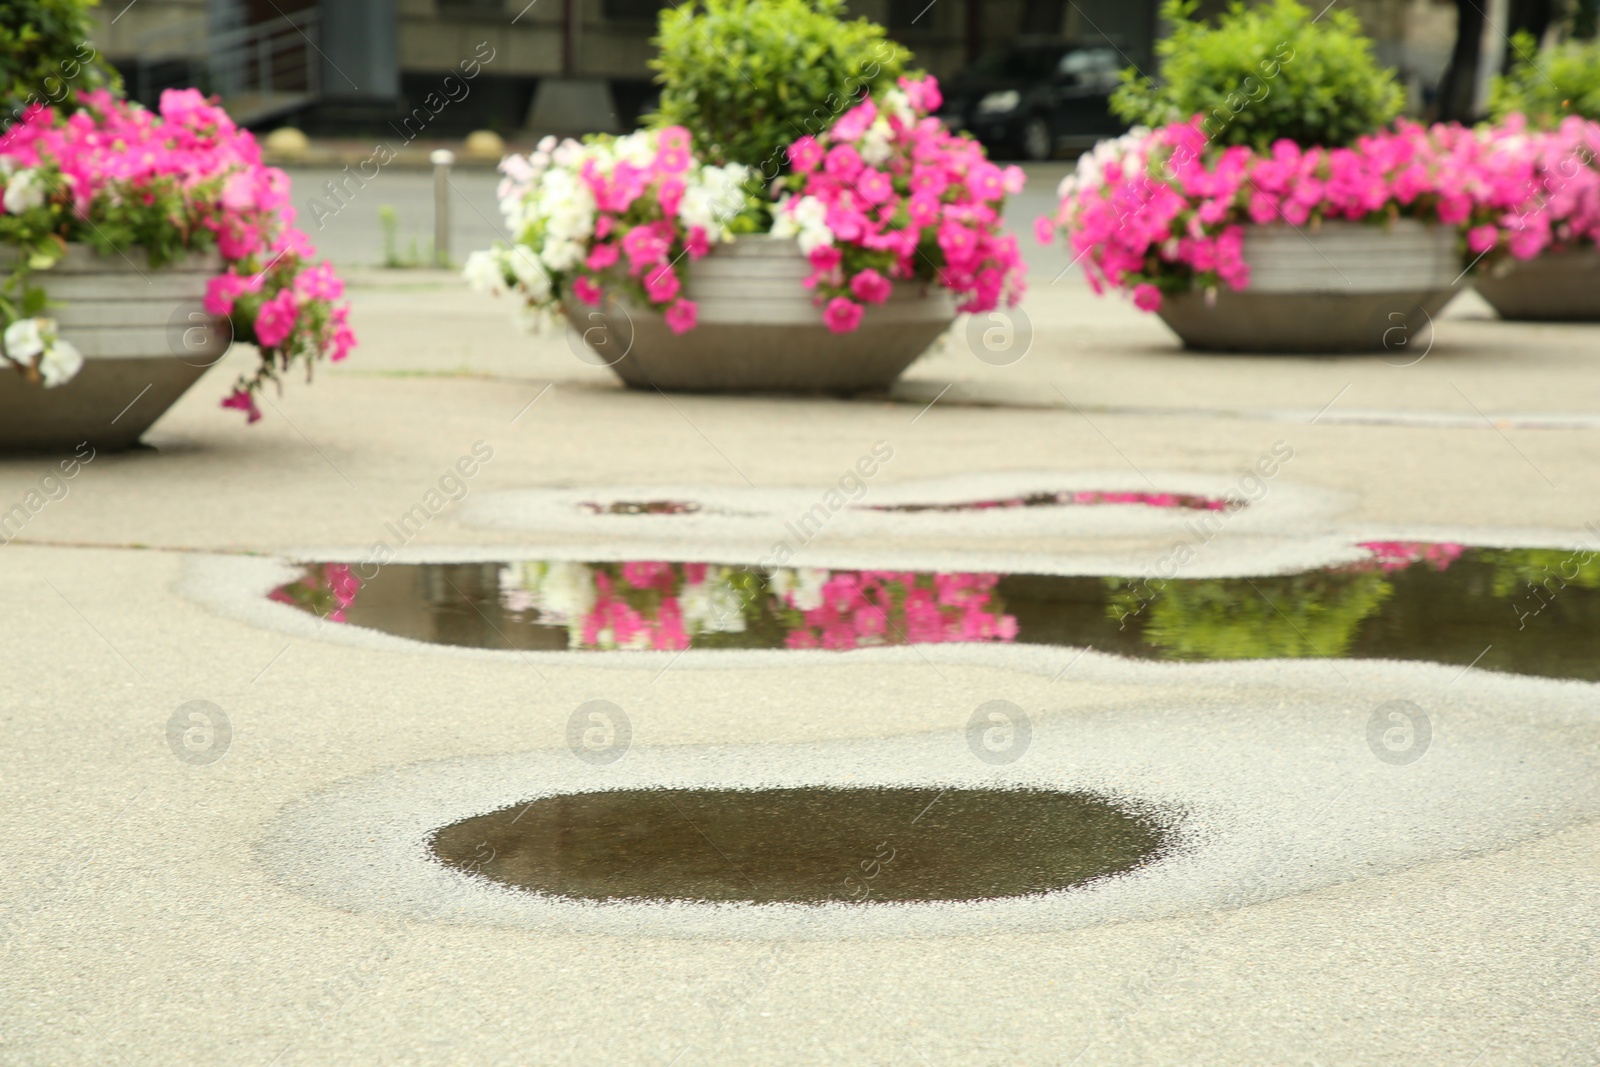 Photo of View of puddle on asphalt near flower beds outdoors